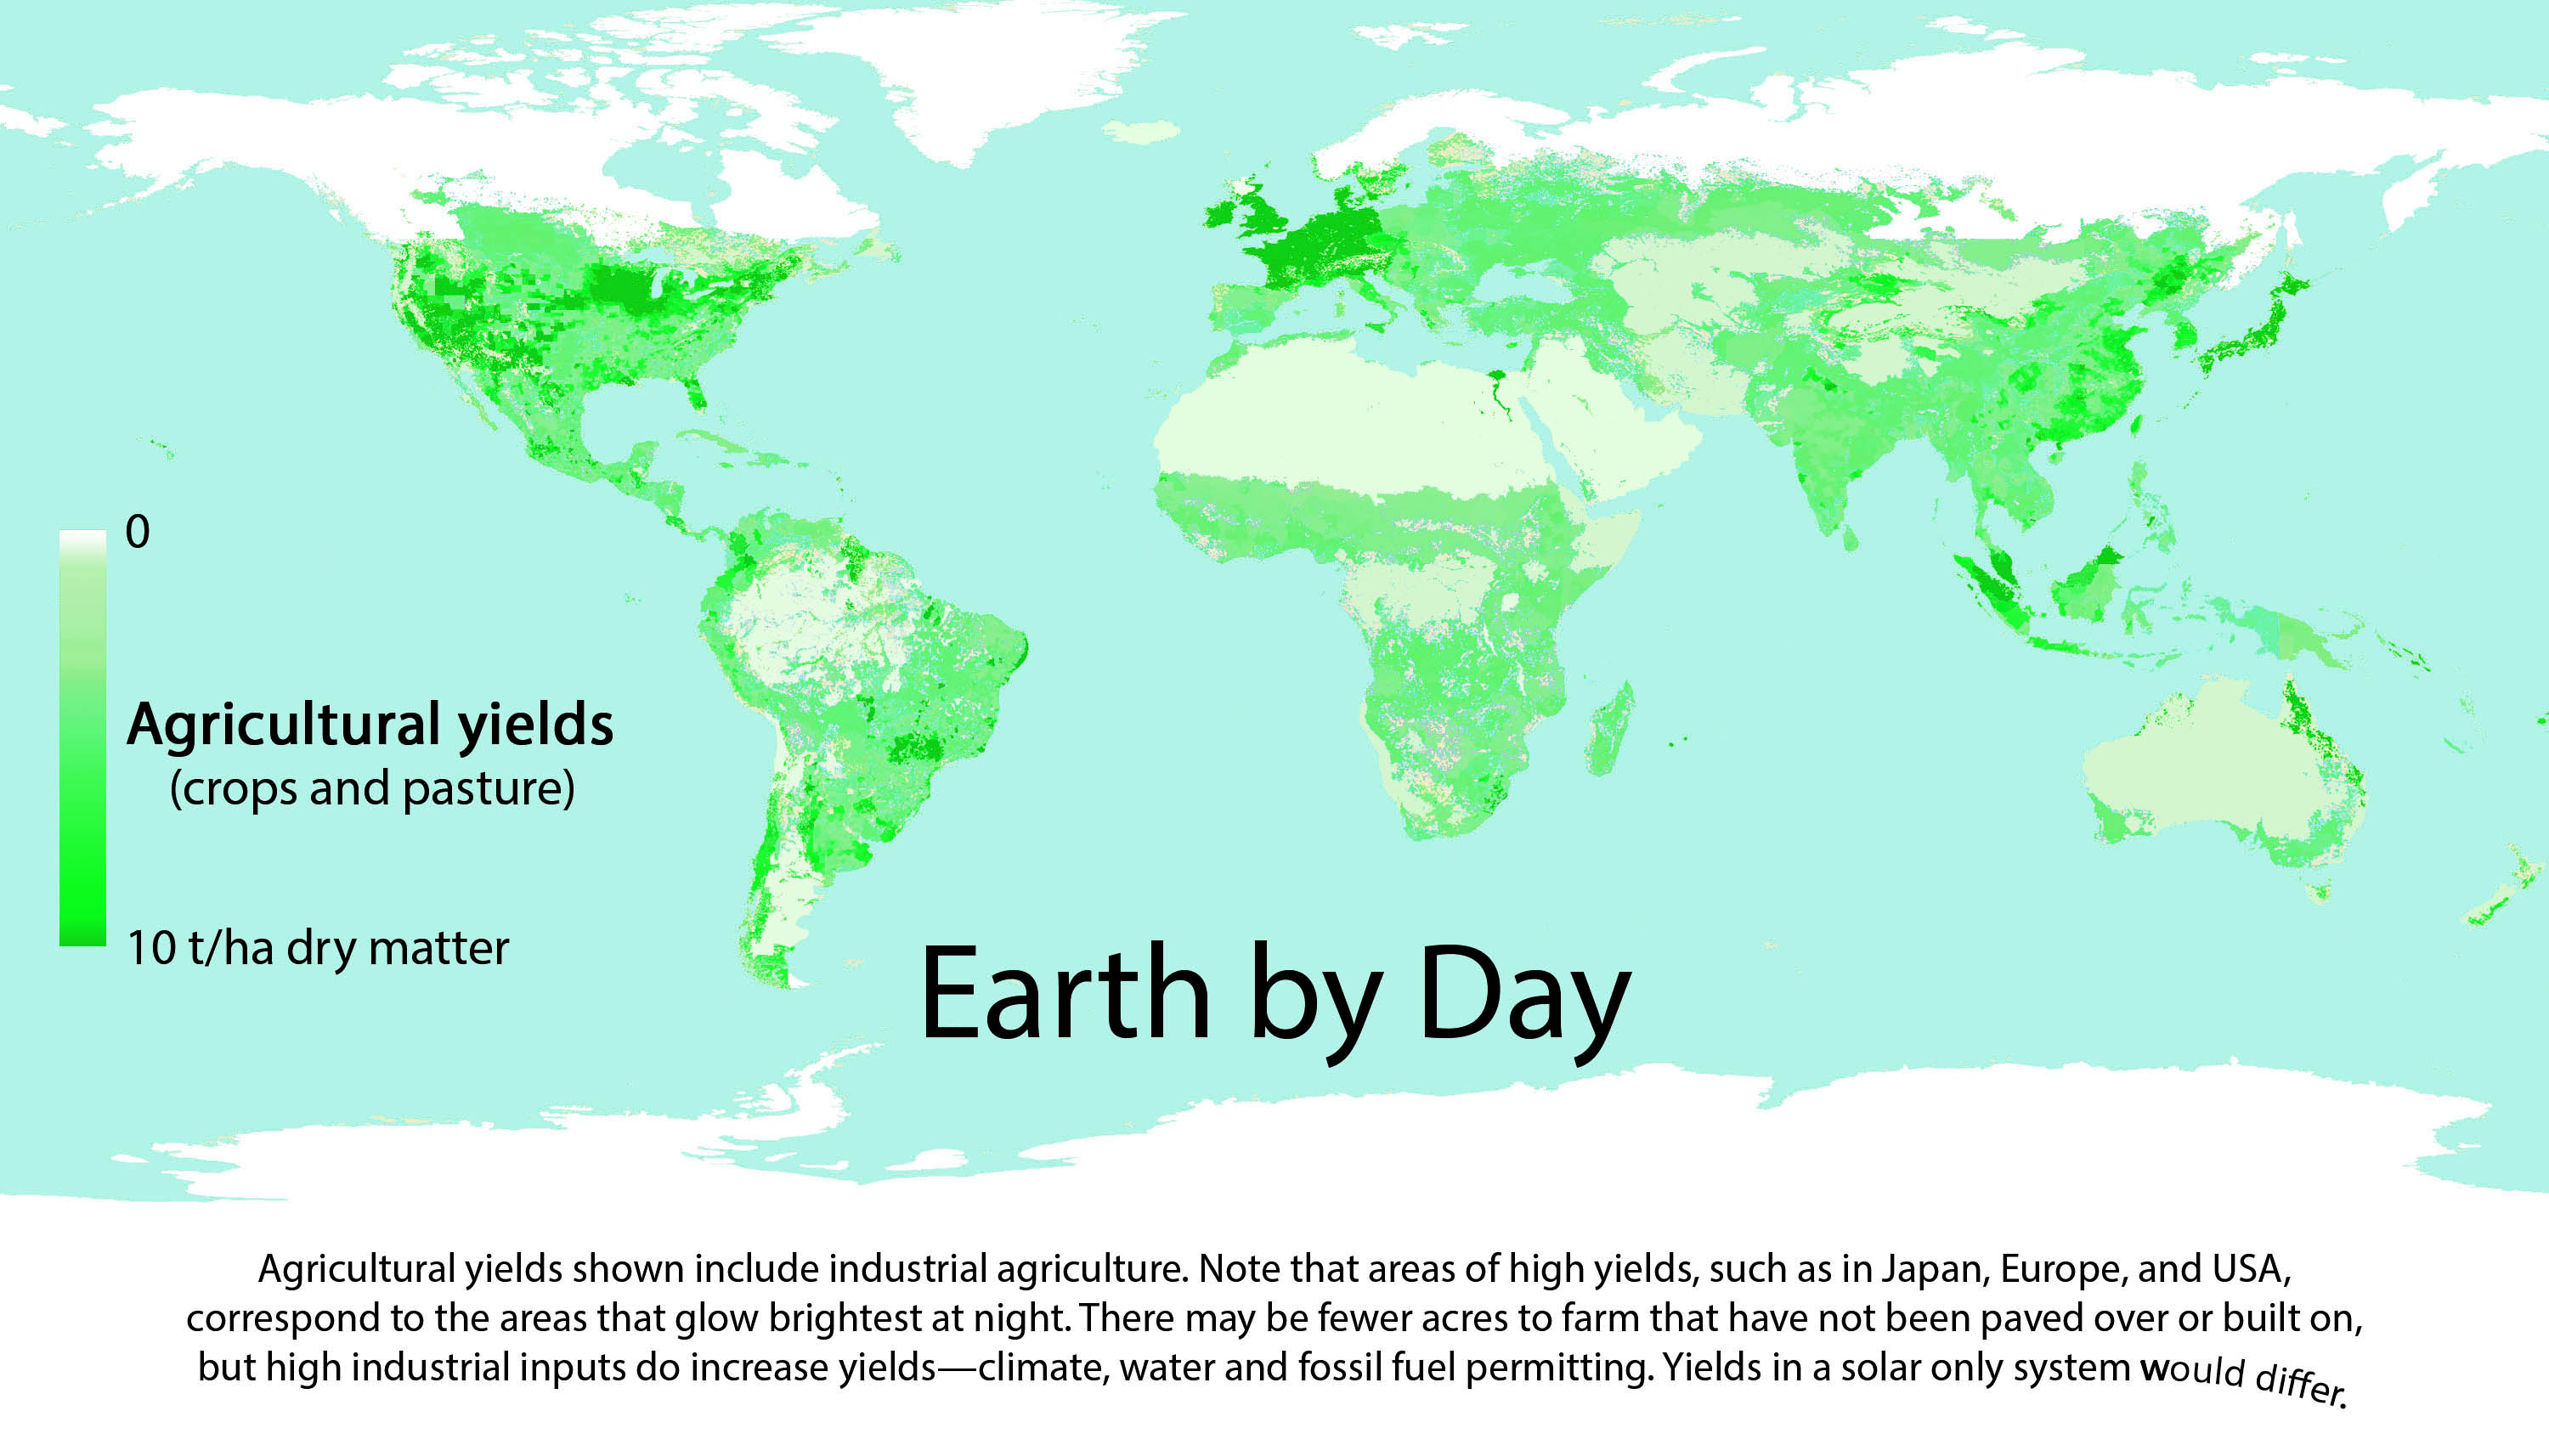 Earth by day